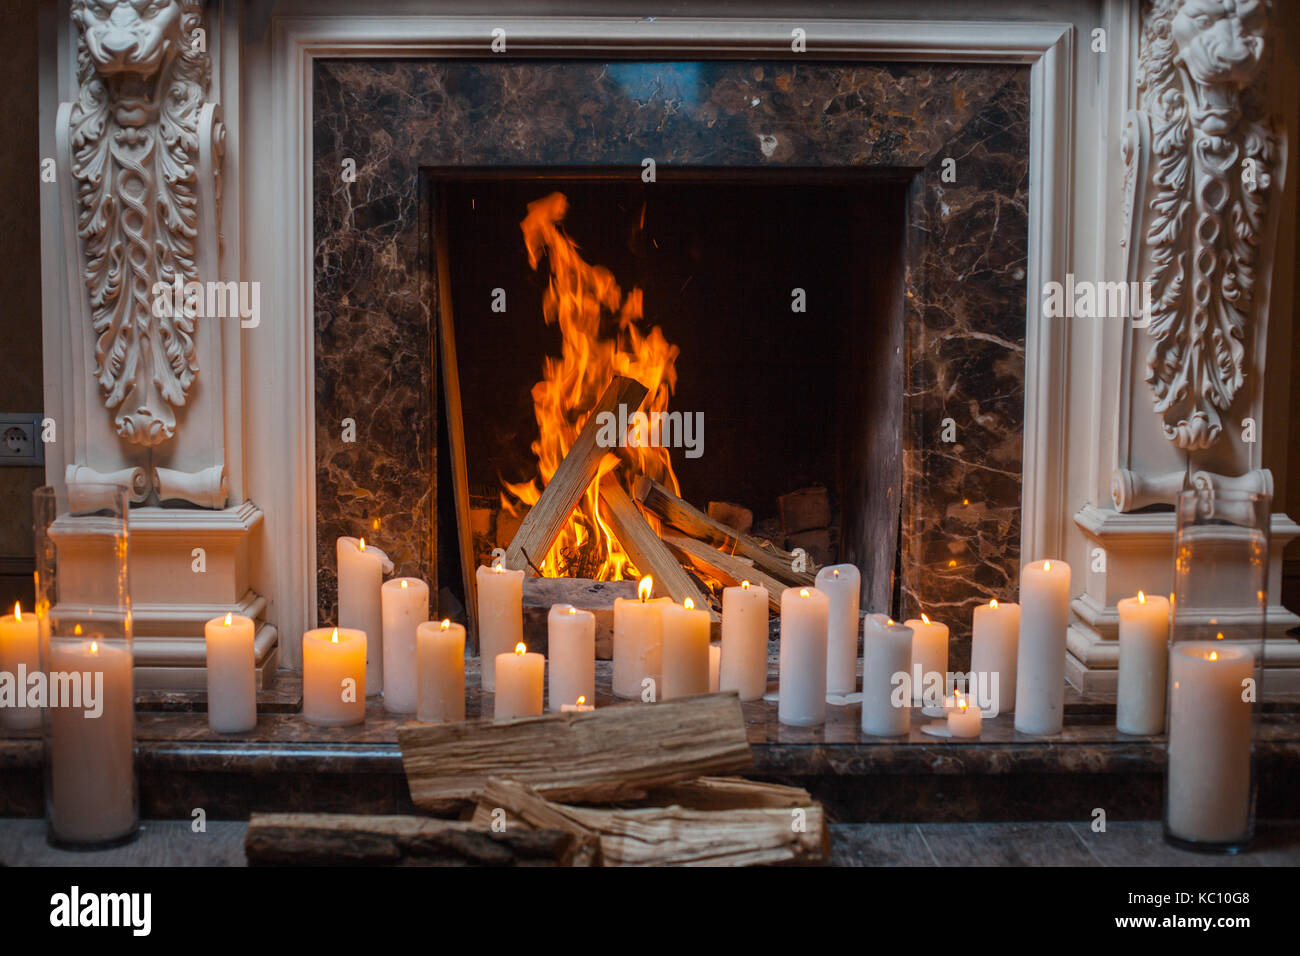 In a fireplace fire burns. Near the fireplace is a lot of burning candles Stock Photo